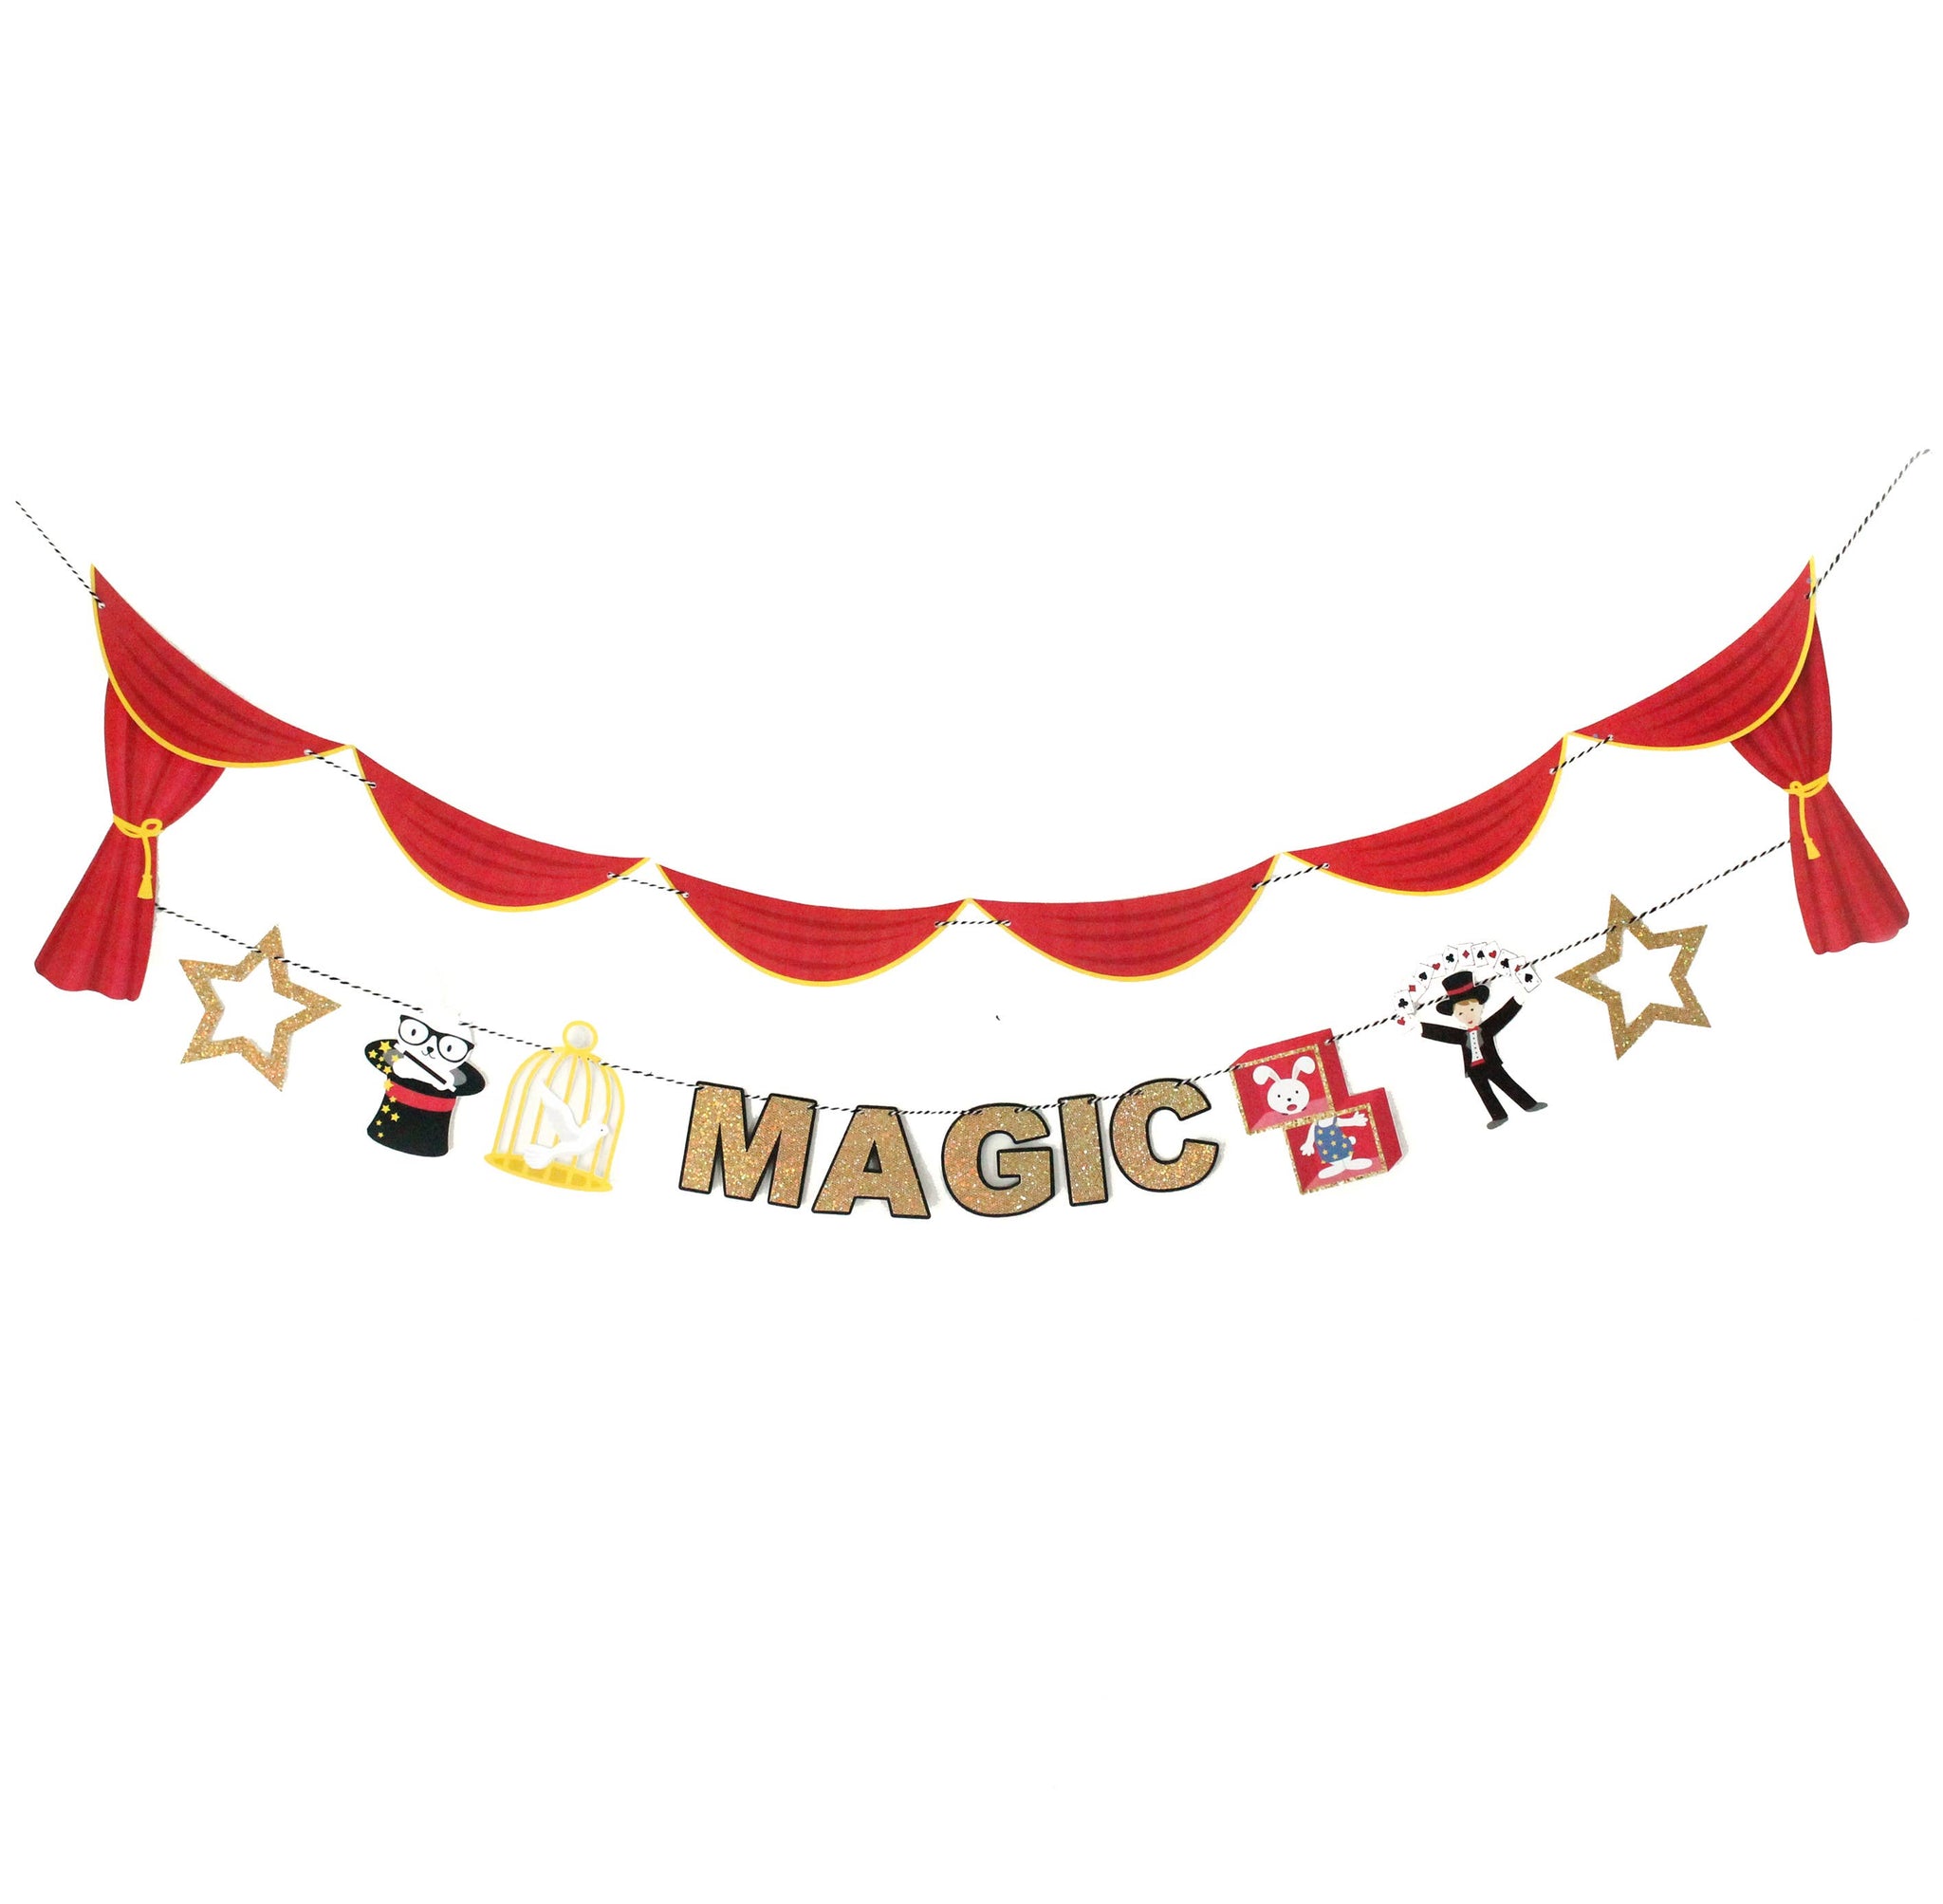 Magic Show - Party Banner